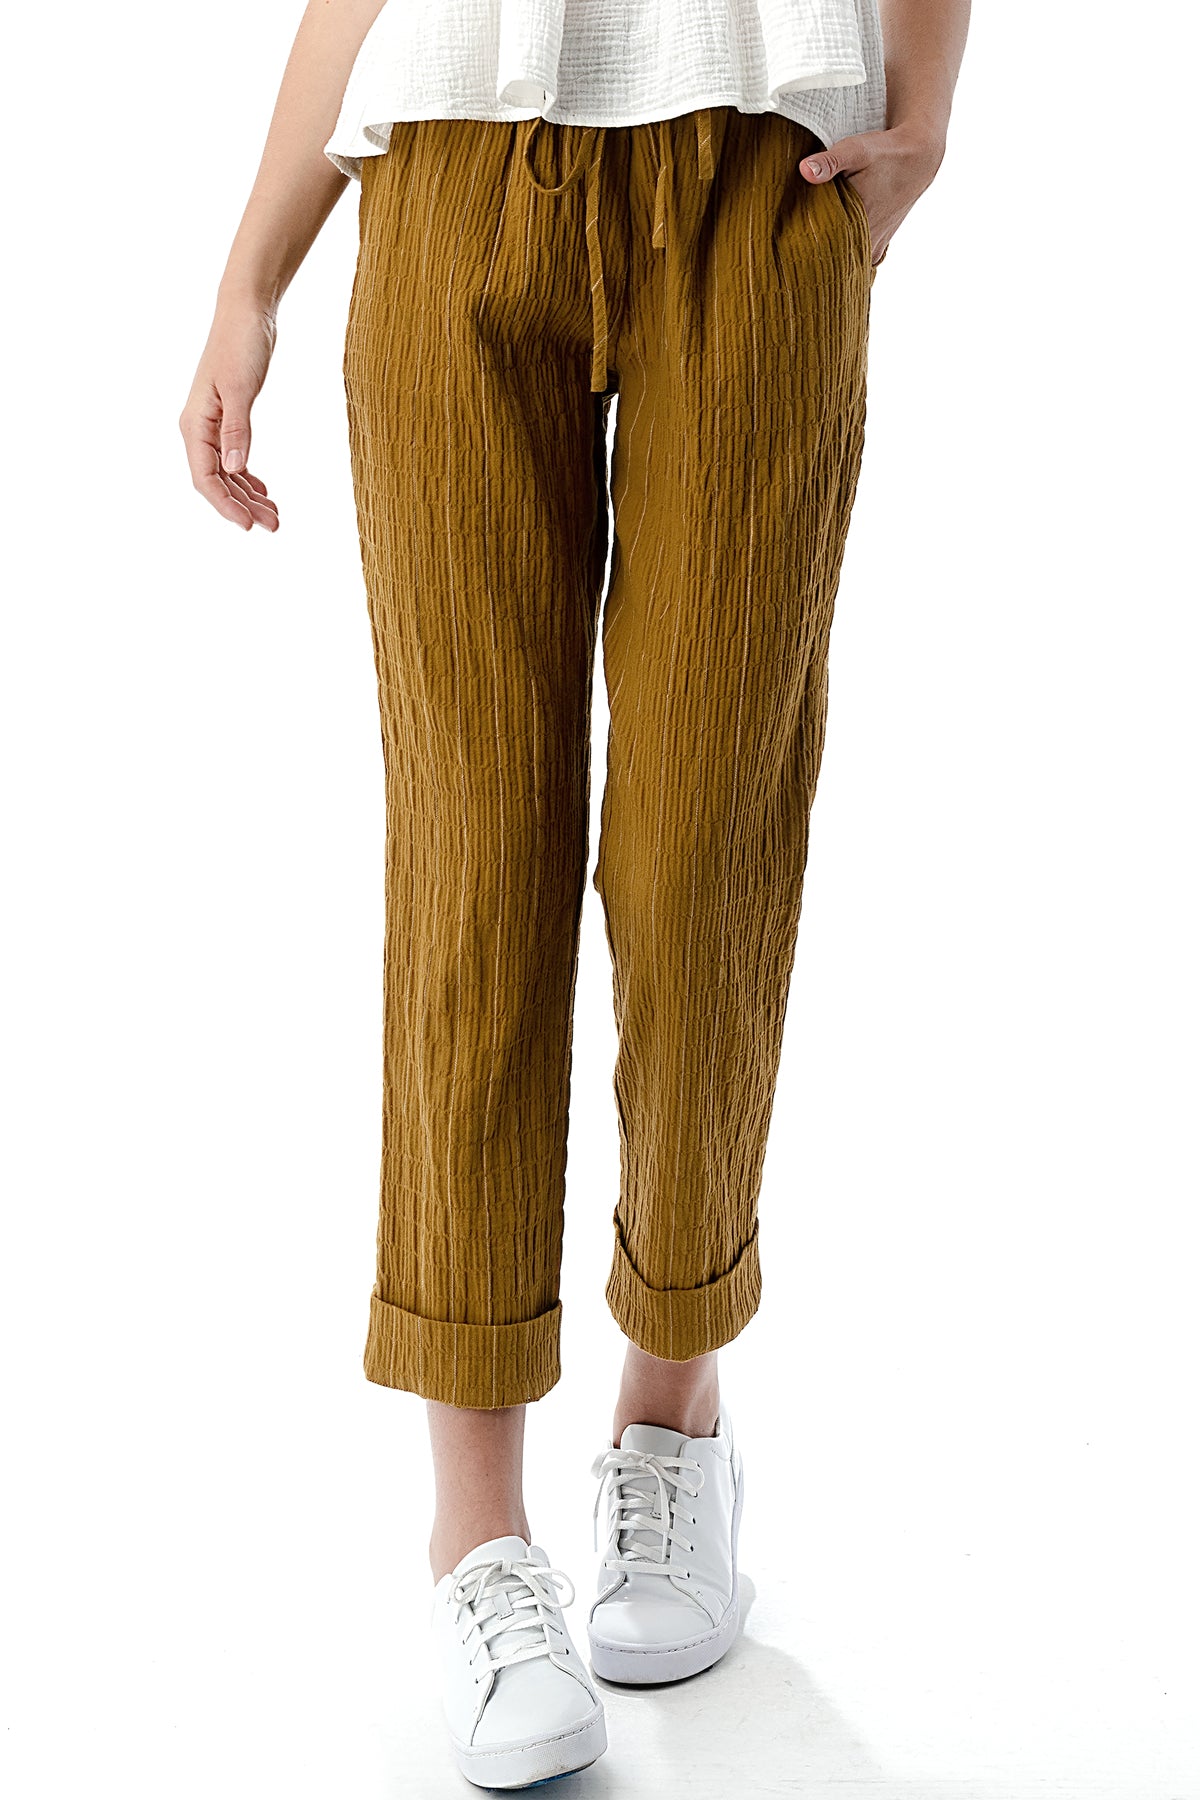 EDGY Land Girl's and Women's Slim-Sation Wrinkled Pull on Fashion Cropped Pant